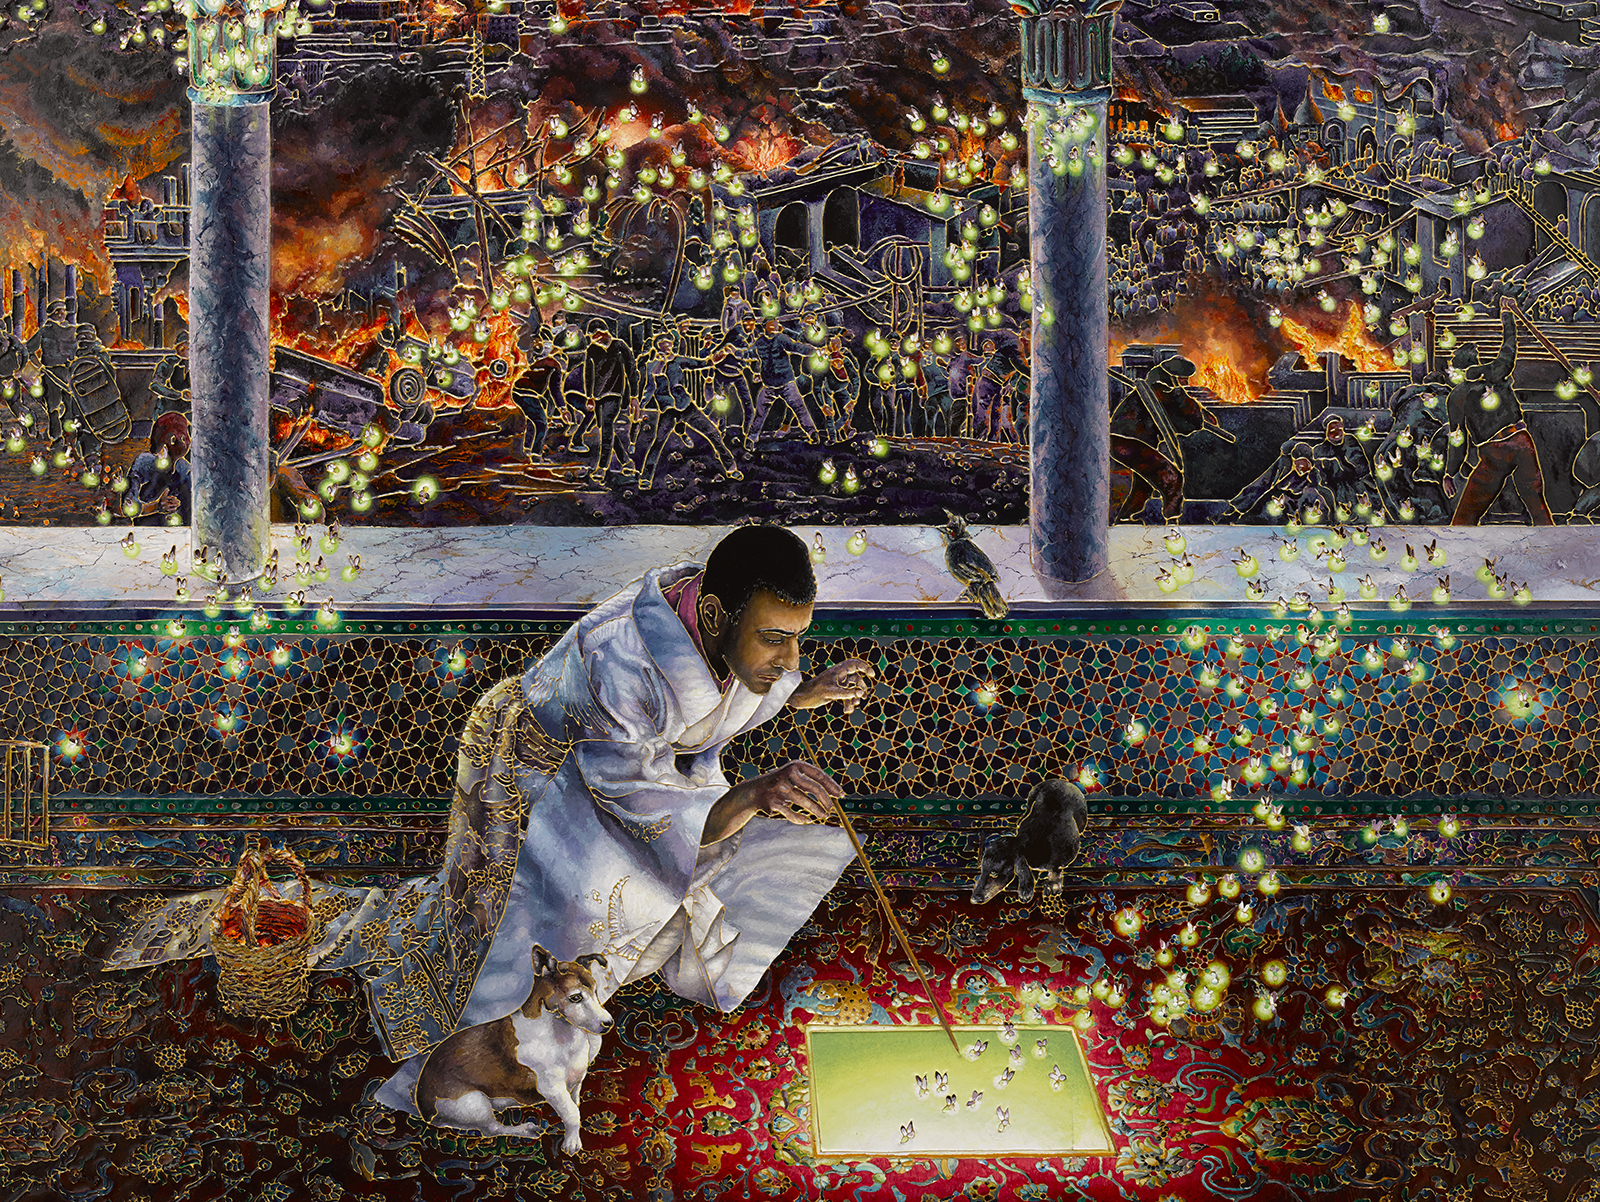 Man surrounded by glowing fireflies looks into an illuminated hole while a chaotic scene unfolds in the background